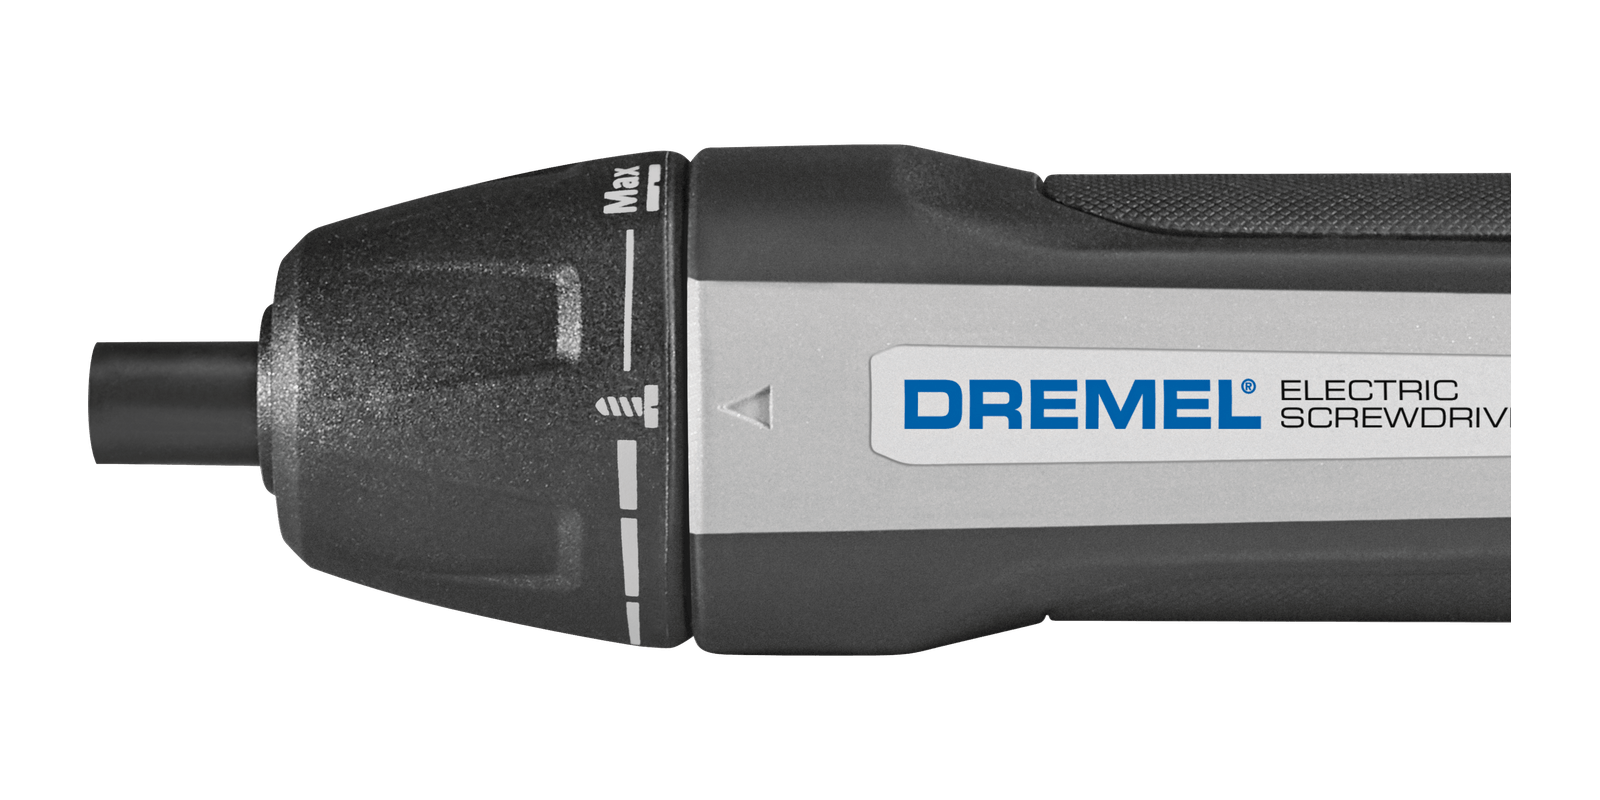 Dremel 4V Cordless Screwdriver Kit with 6 Power Settings and Smart Stop  Technology, Includes 7 Screwdriver Bits, 1 Bit Extender, USB Cable and  Power